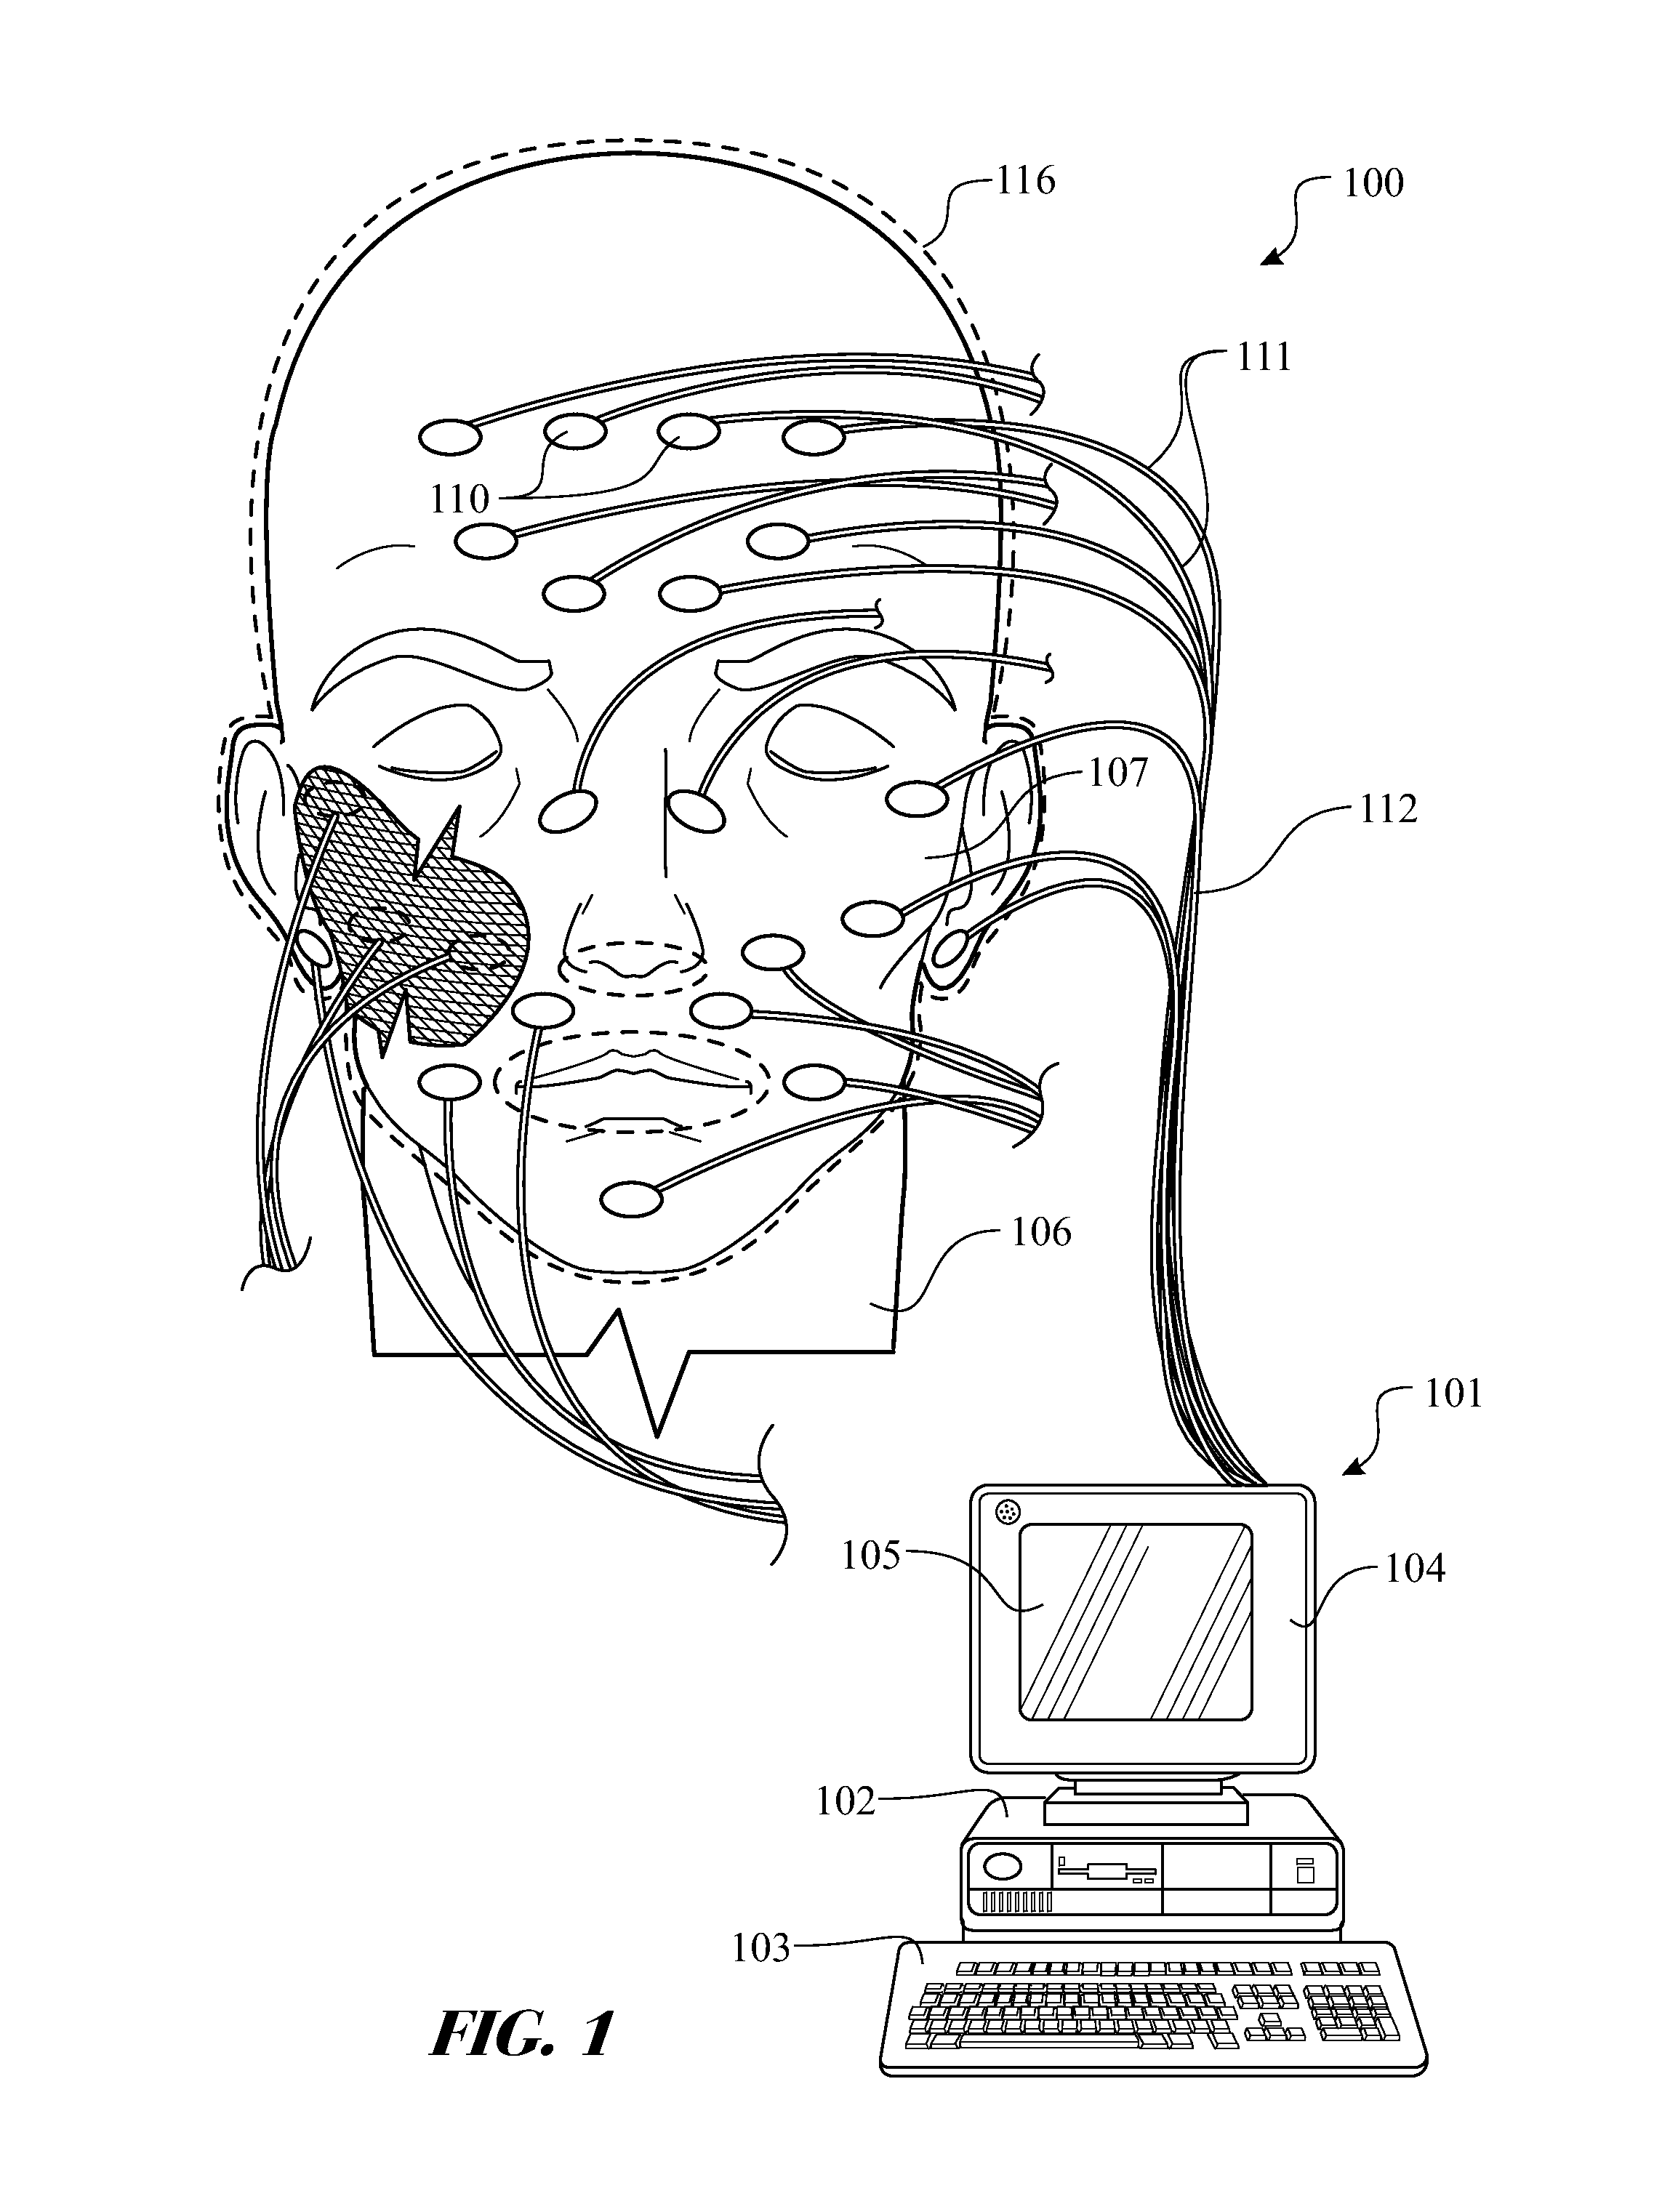 Facial movement measurement and stimulation apparatus and method